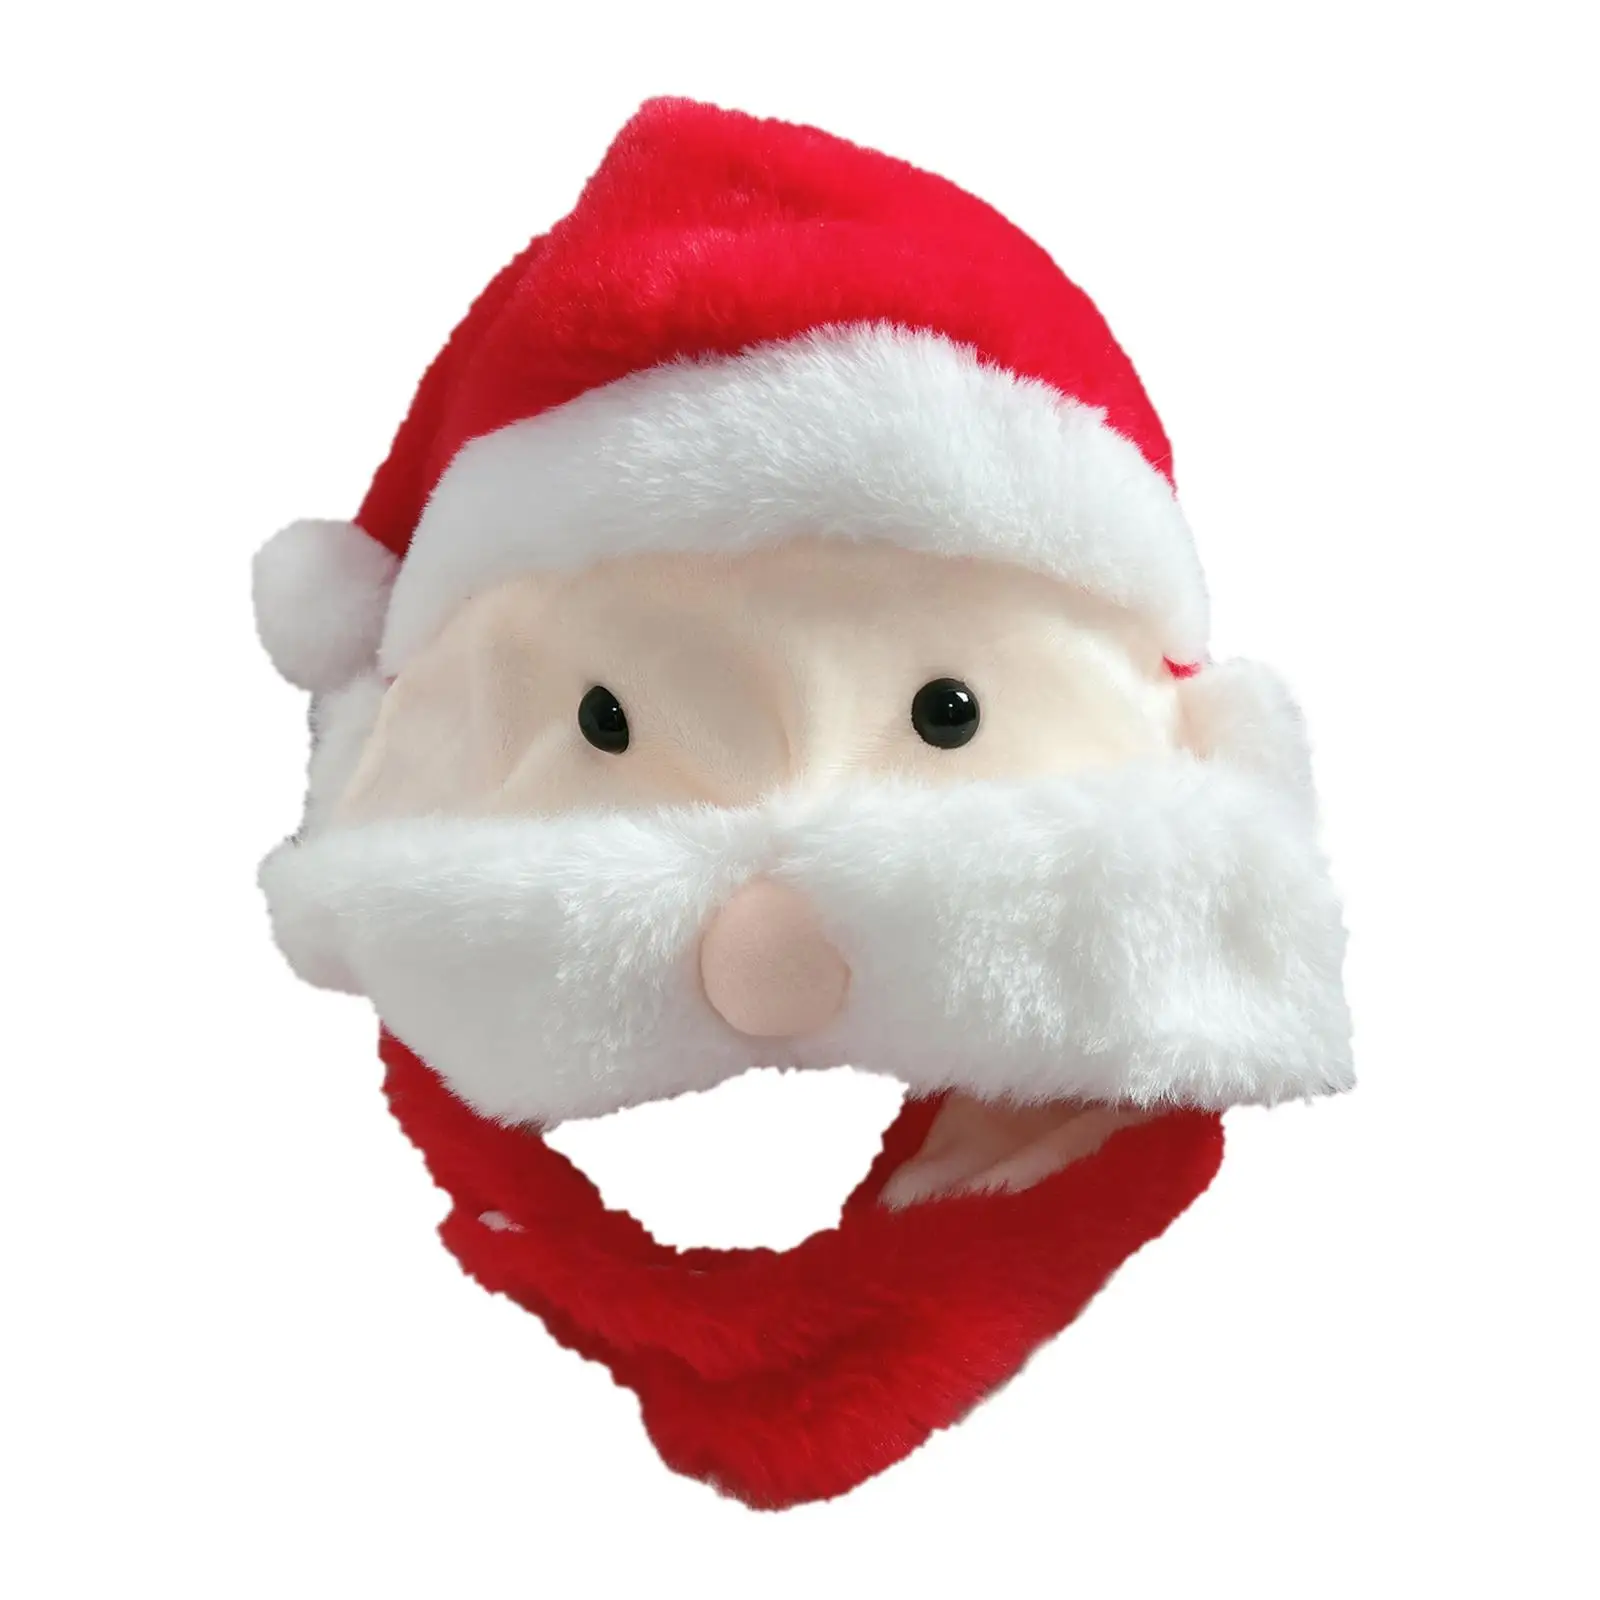 Soft Christmas Plush Hat Adult Kids Holiday Decorations Winter Novelty Headgear Warm Xmas Hat Funny for Dress Festival Party